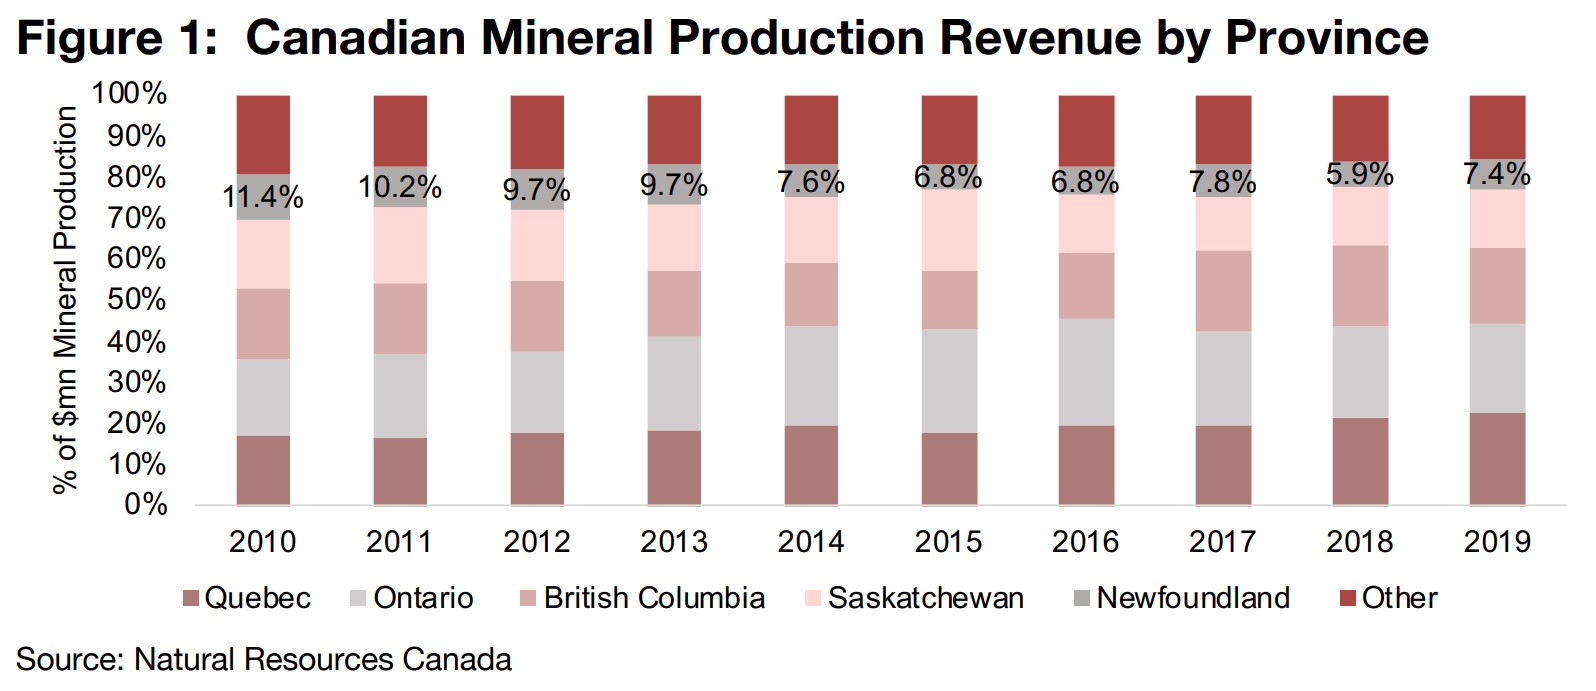 1) Newfoundland Mineral Industry 